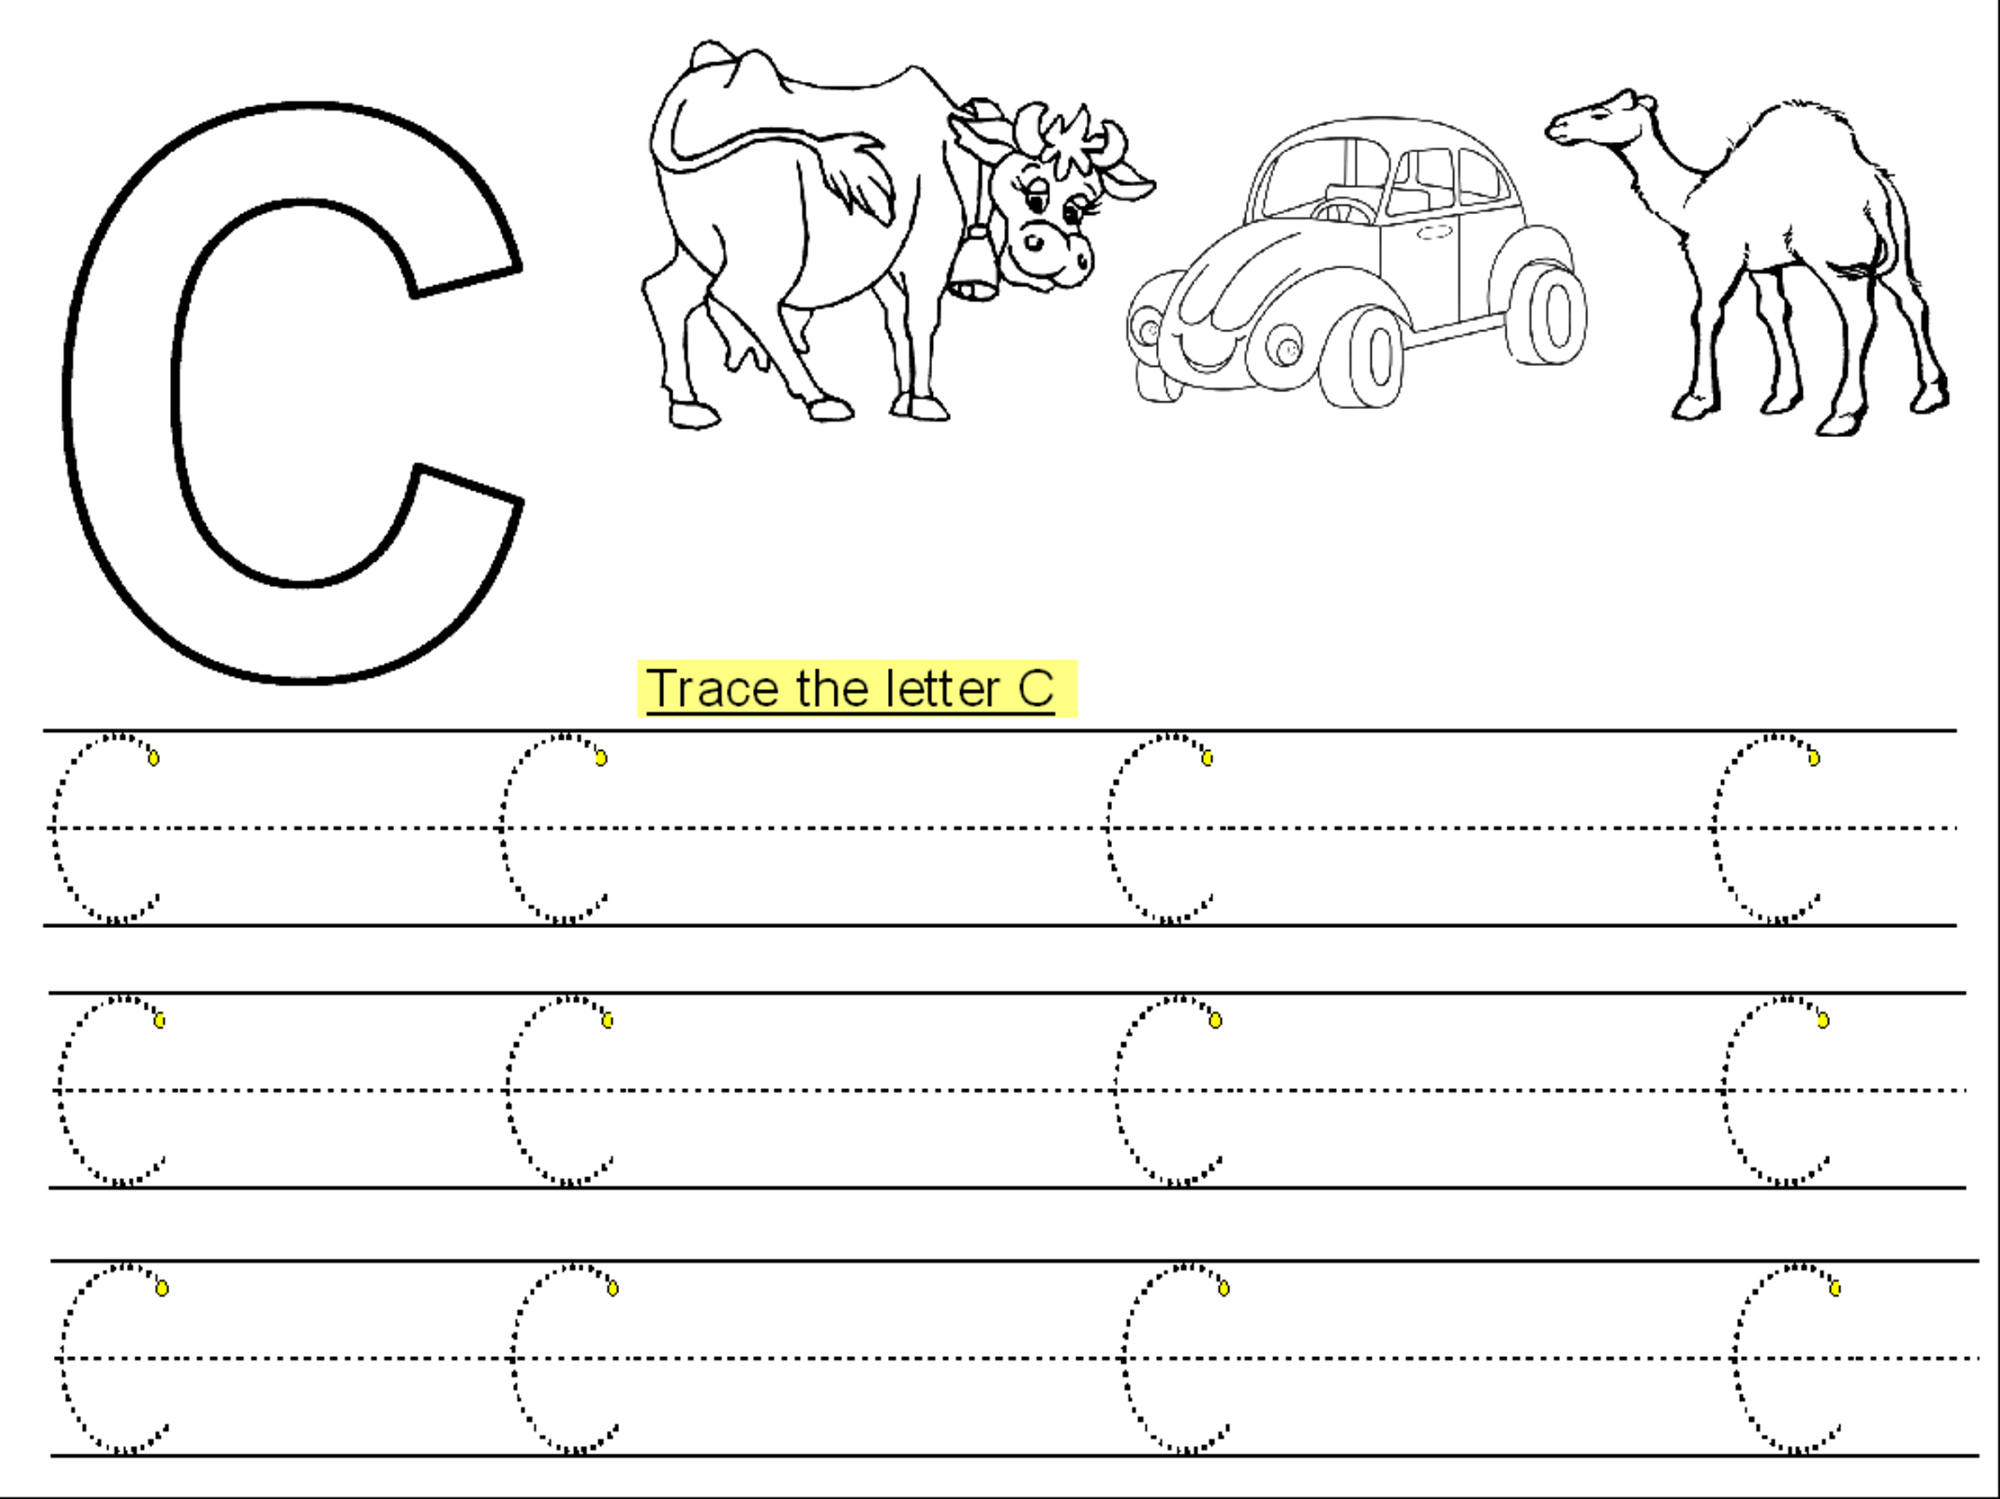 Trace Letter C Printable | Kiddo Shelter - Letter C Puzzle Printable